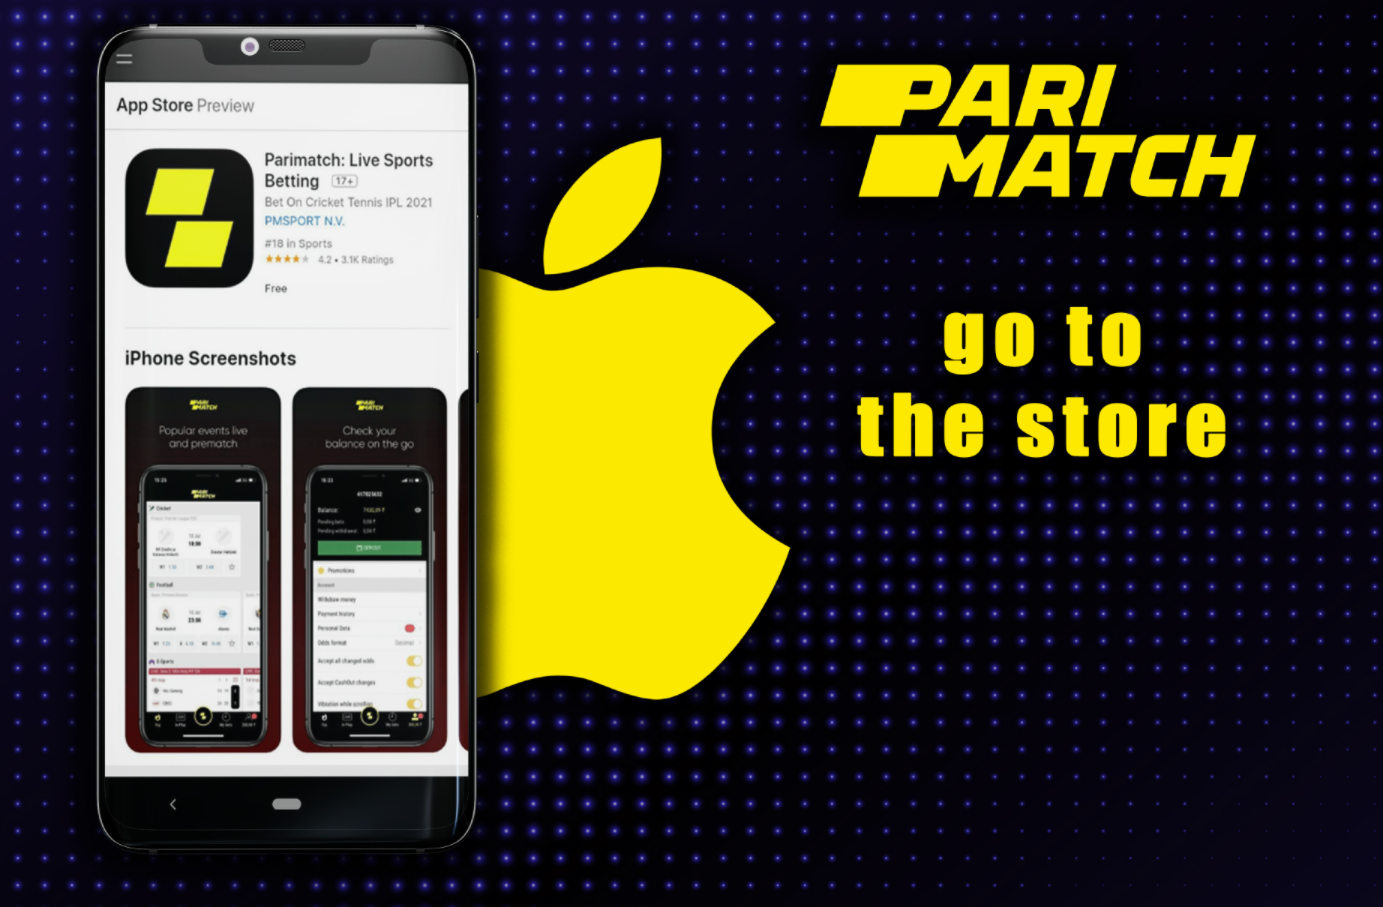 What are the benefits of playing in Pari match via app